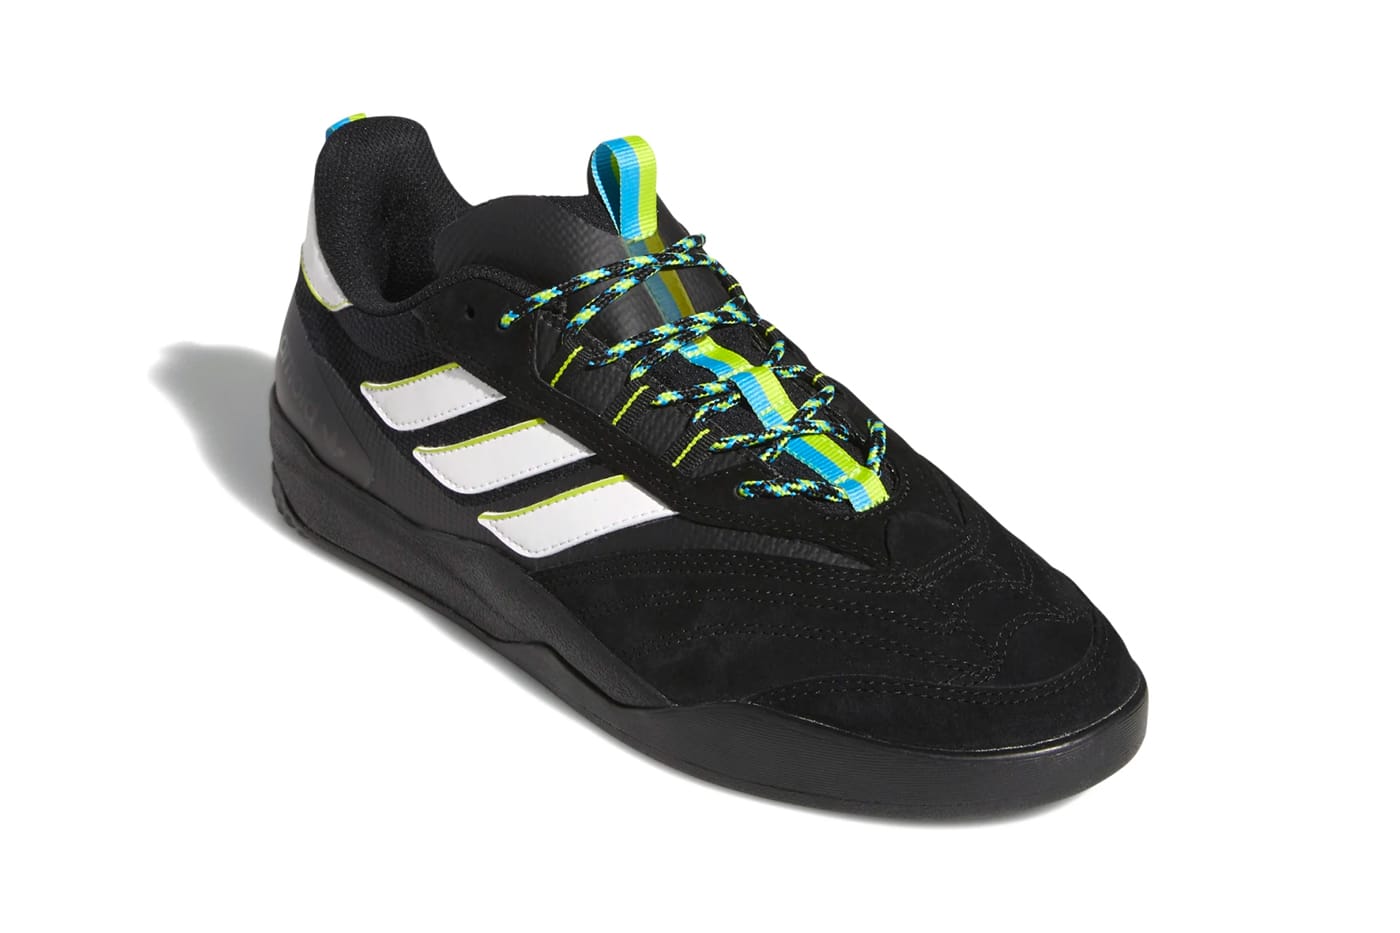 adidas copa mike arnold